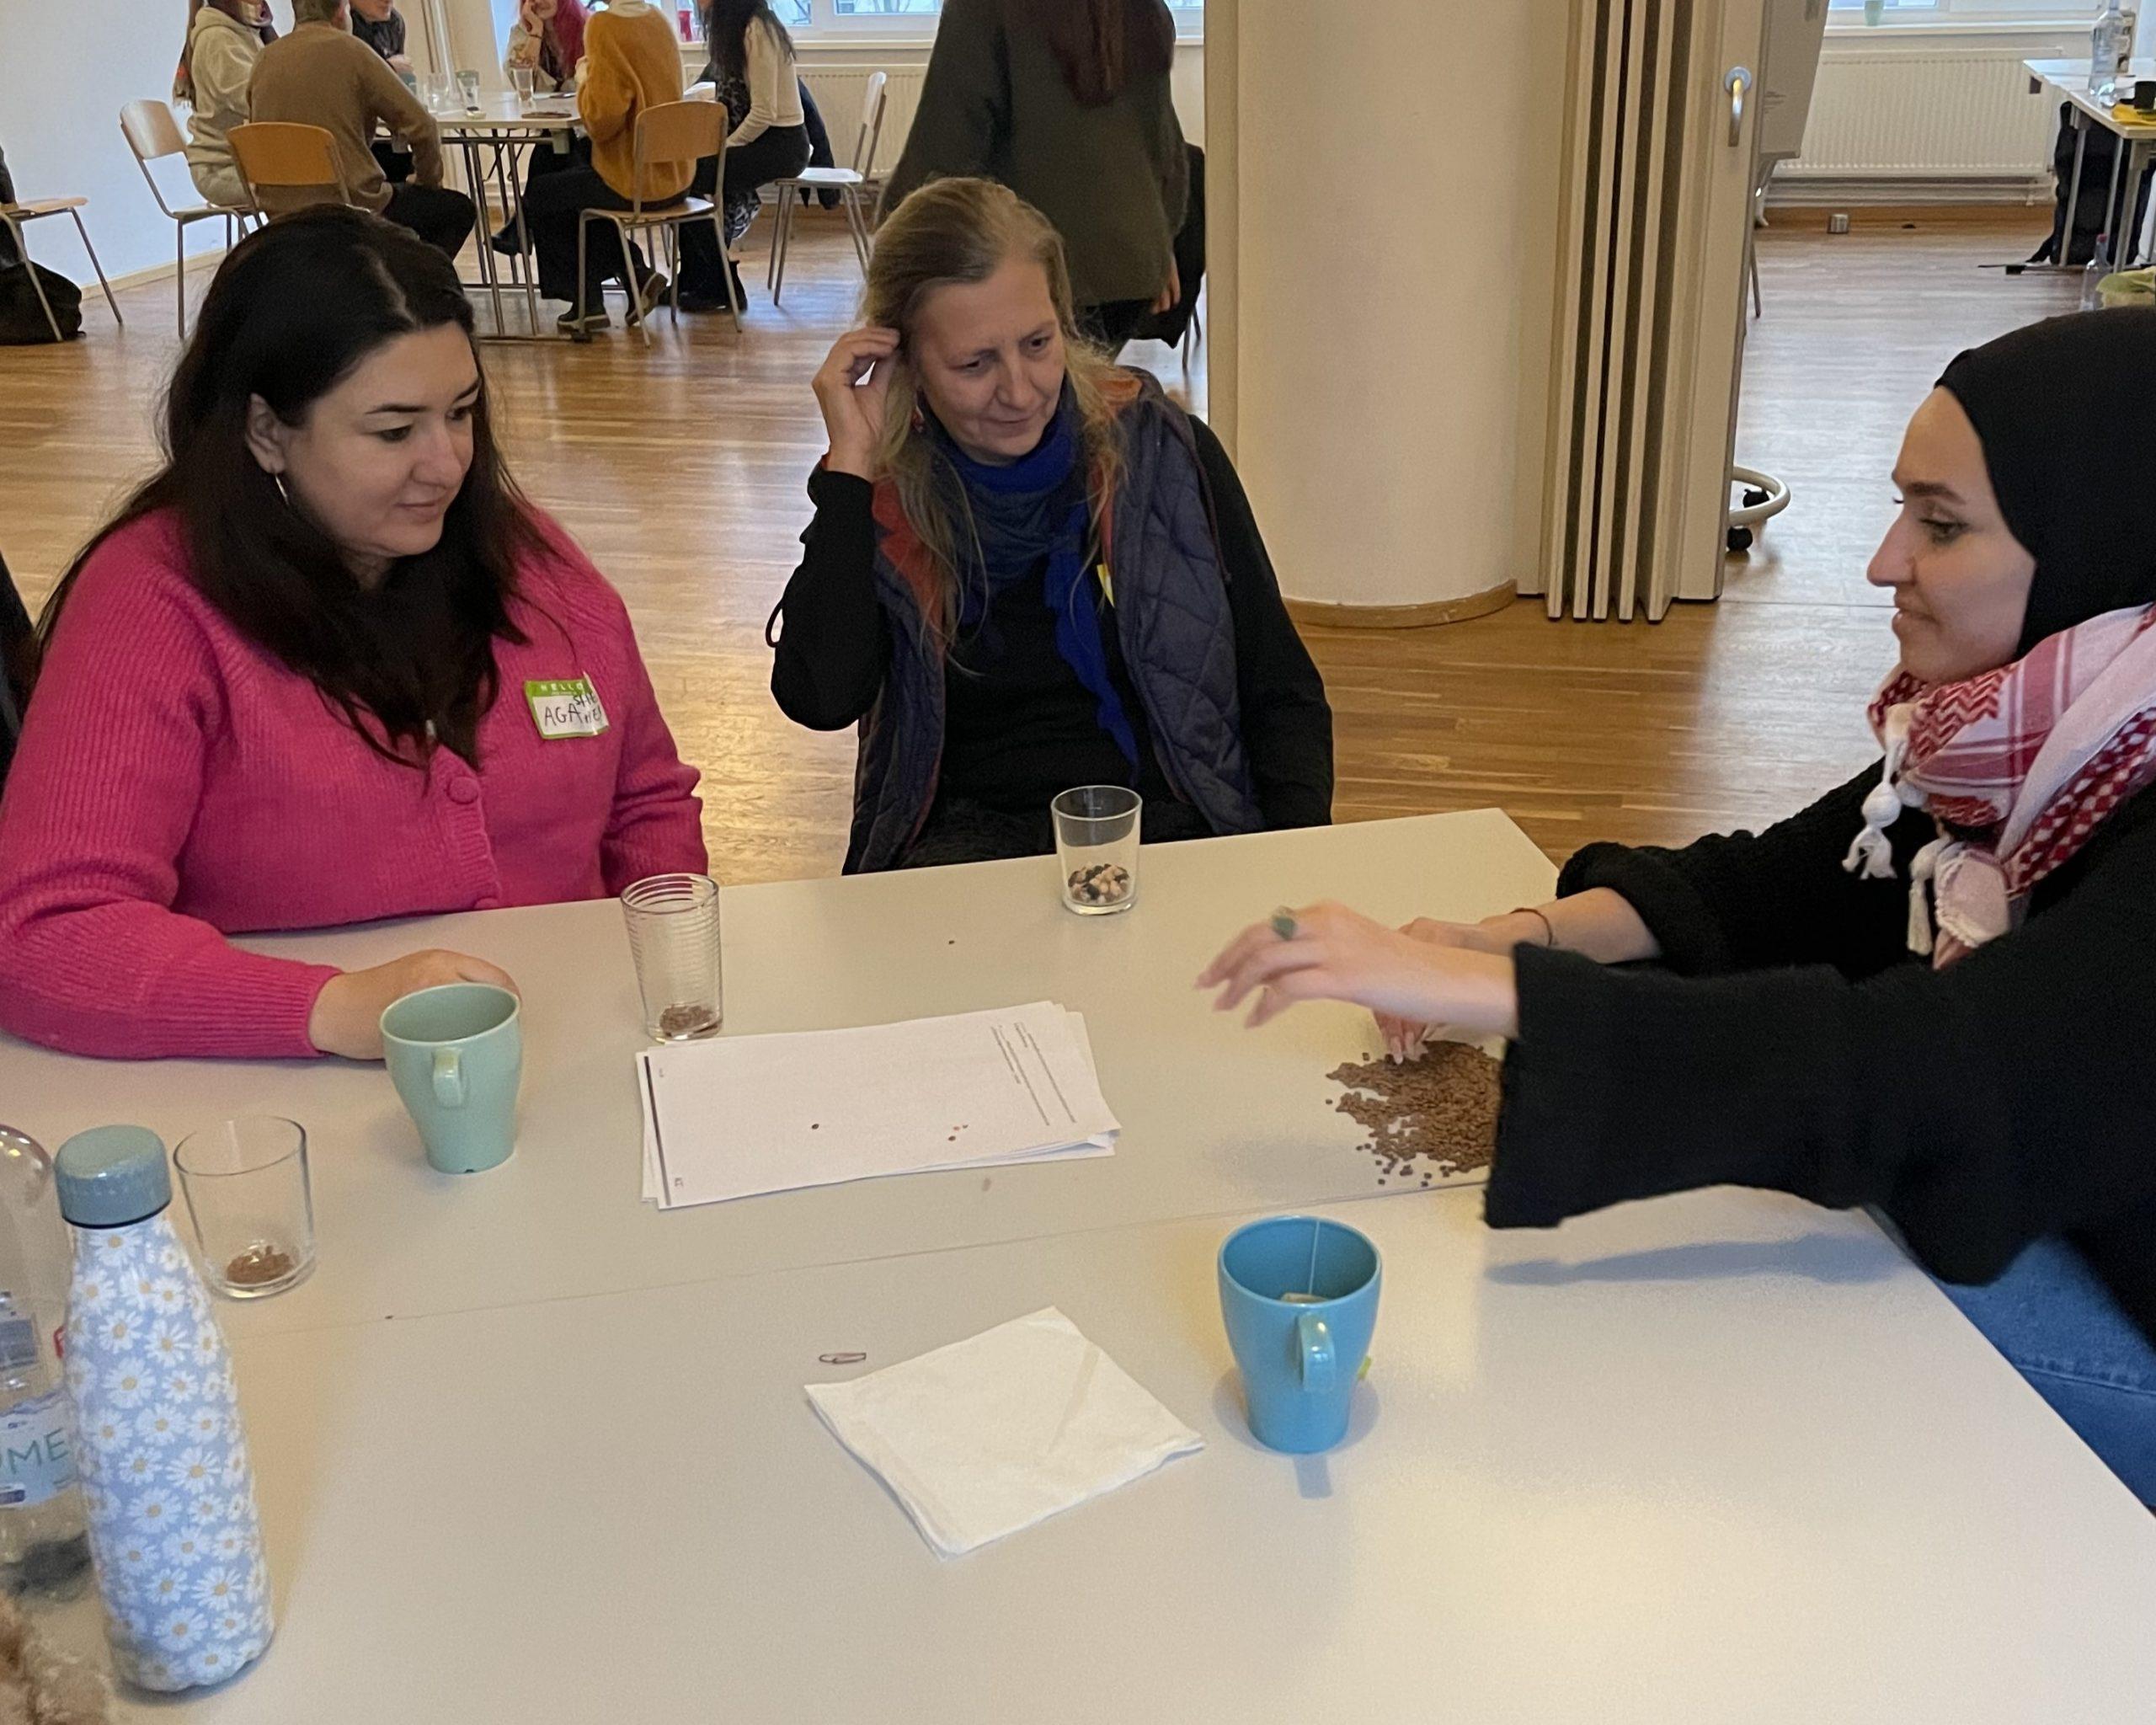 Facilitators play the Dice Game, an interactive and fun activity that allows participants to deepen their understanding of institutional and structural discrimination through the migratory context